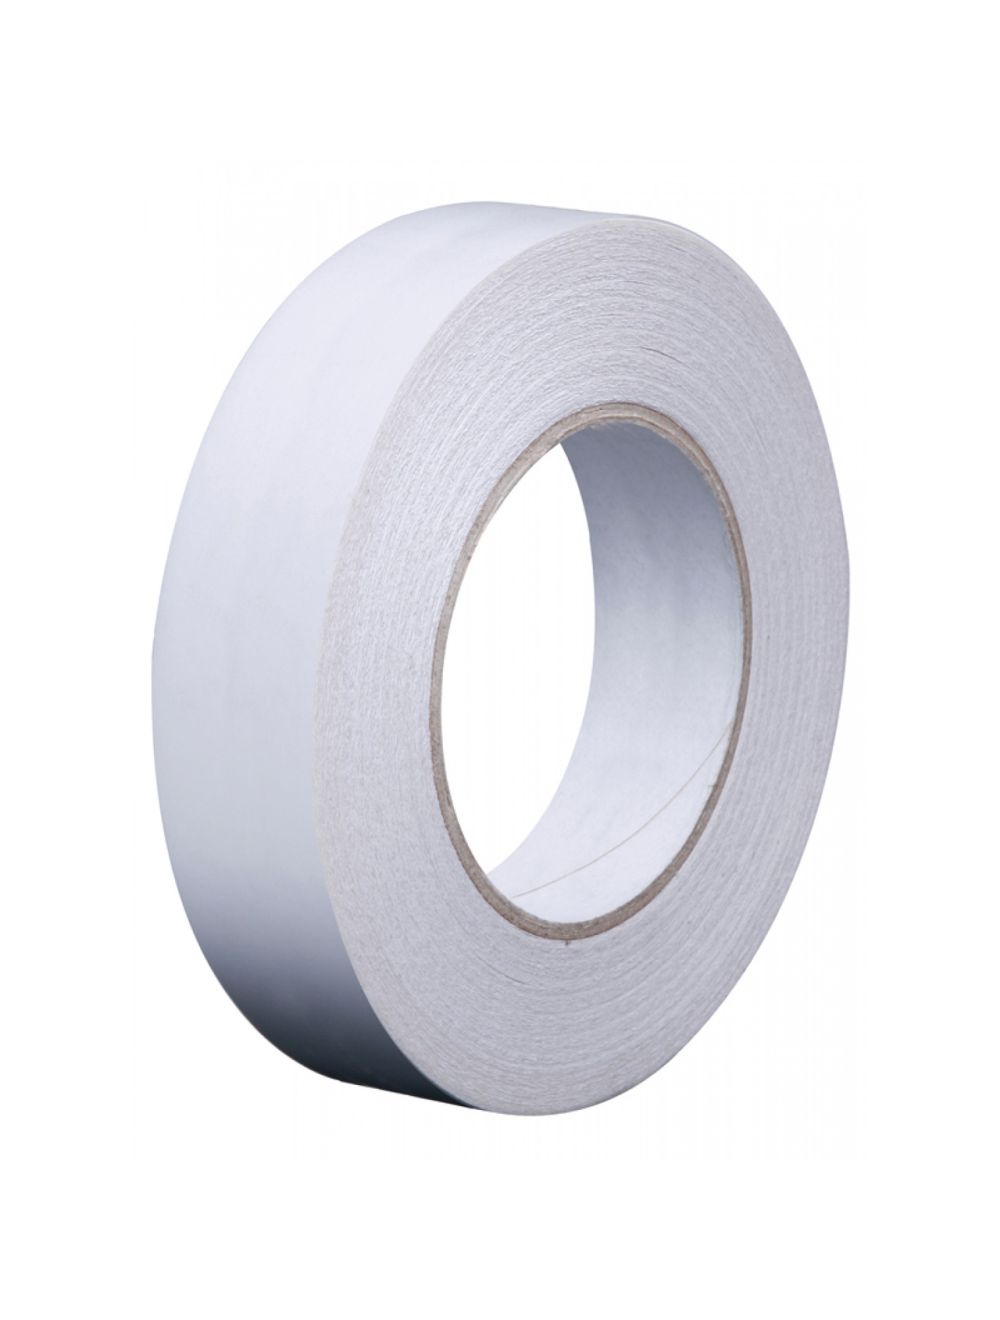 25MM DOUBLE SIDED TAPE 50M  X 5 REELS